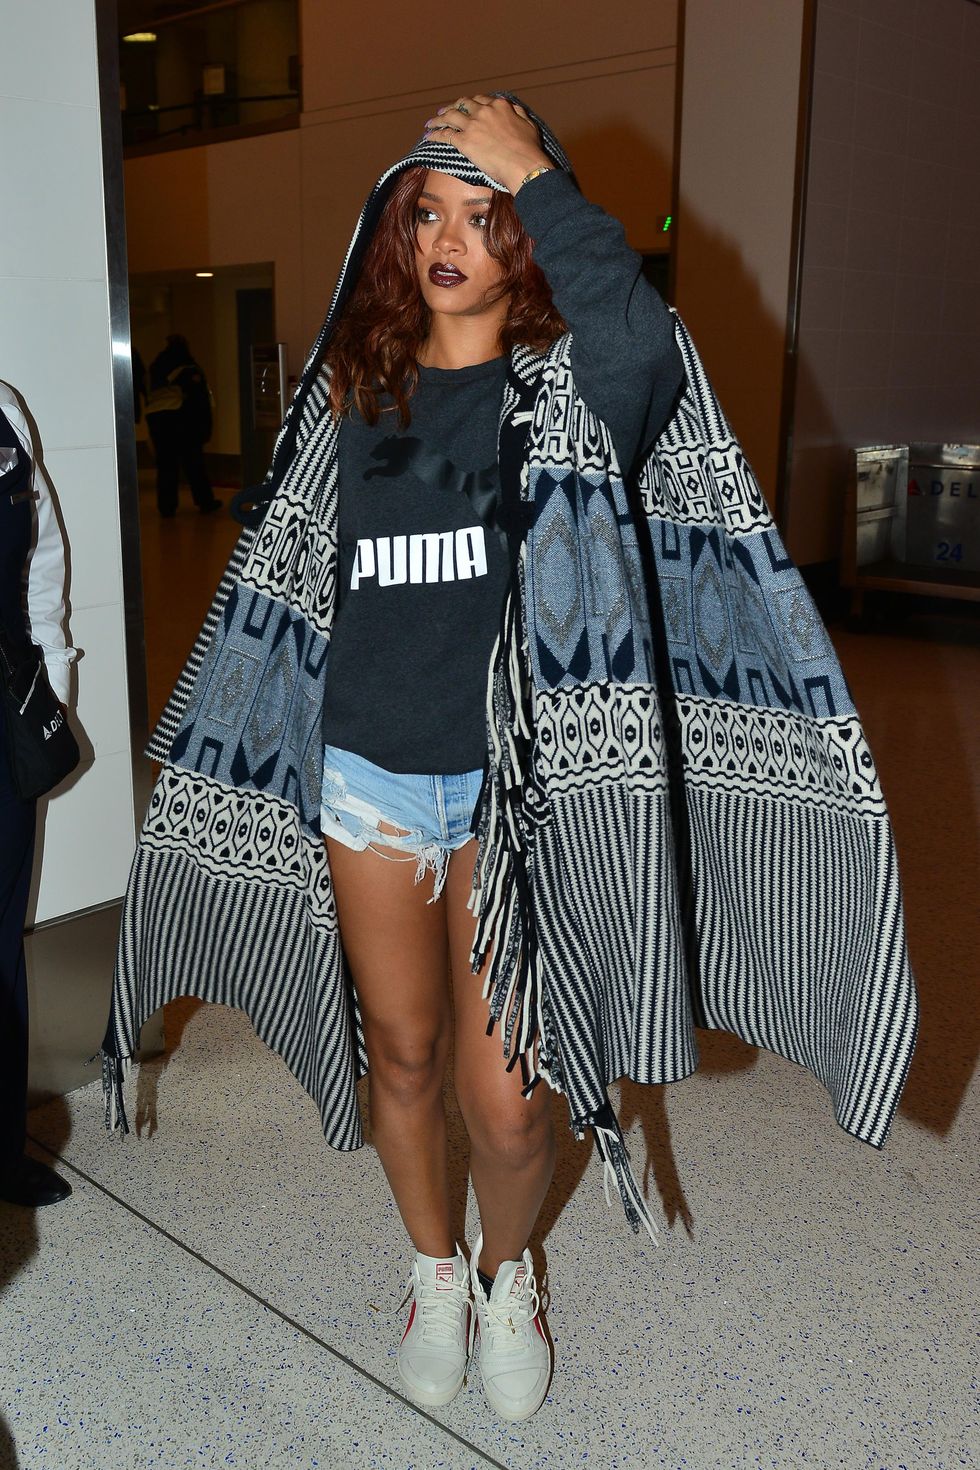 LOS ANGELES, CA - APRIL 28: Rihanna makes her through LAX on April 28, 2015 in Los Angeles, California. &#xA;&#xA;PHOTOGRAPH BY Candid / Barcroft Media (Photo credit should read Candid / Barcroft Media via GC Images)